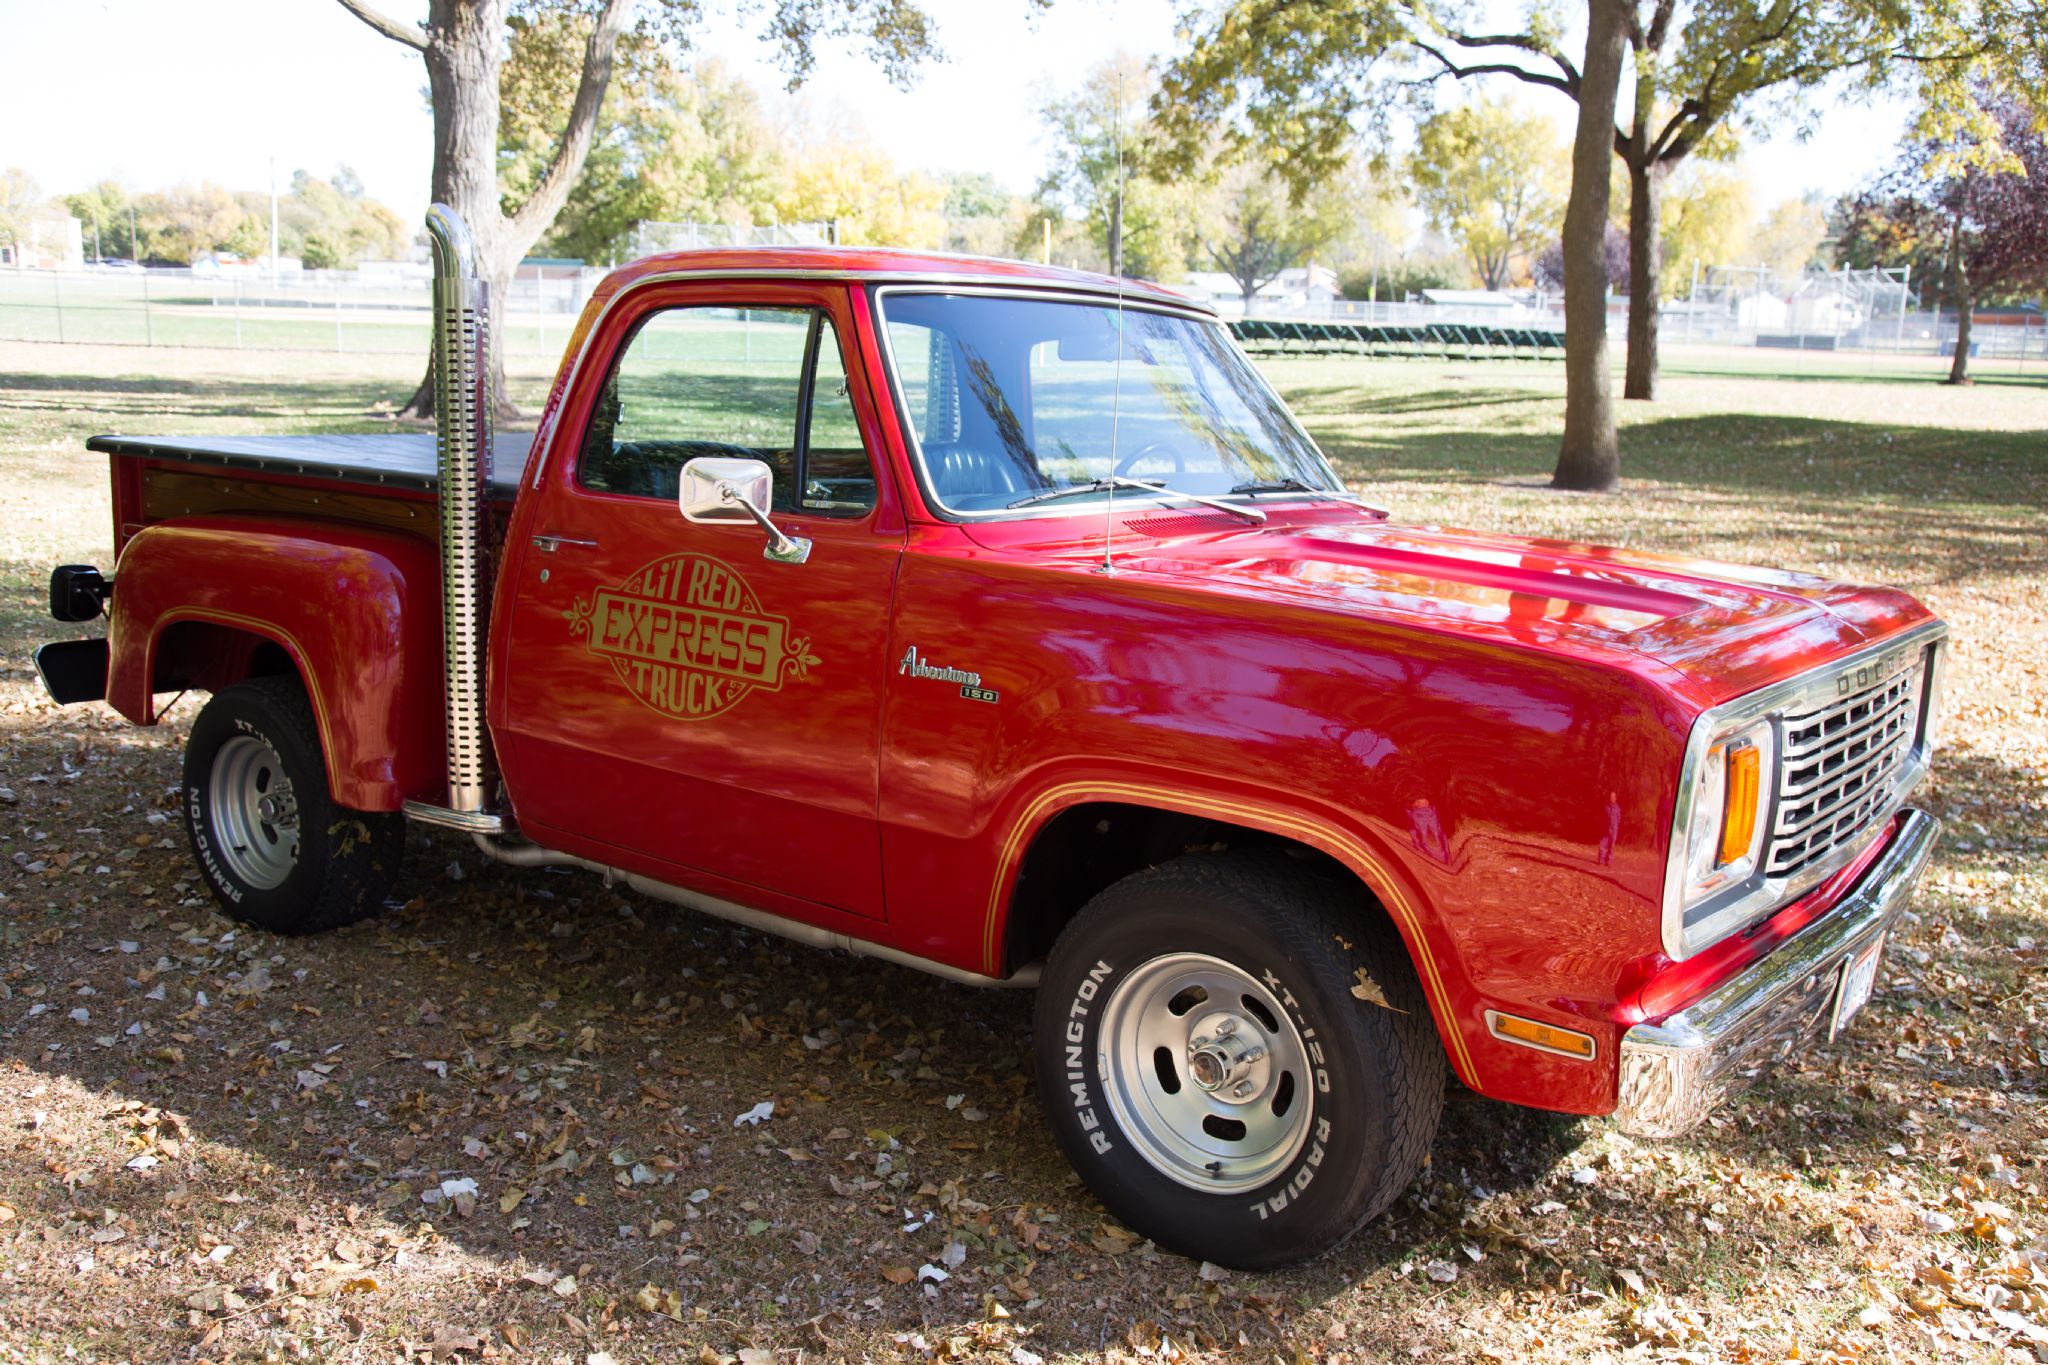  Dodge LIL Red Express Truck